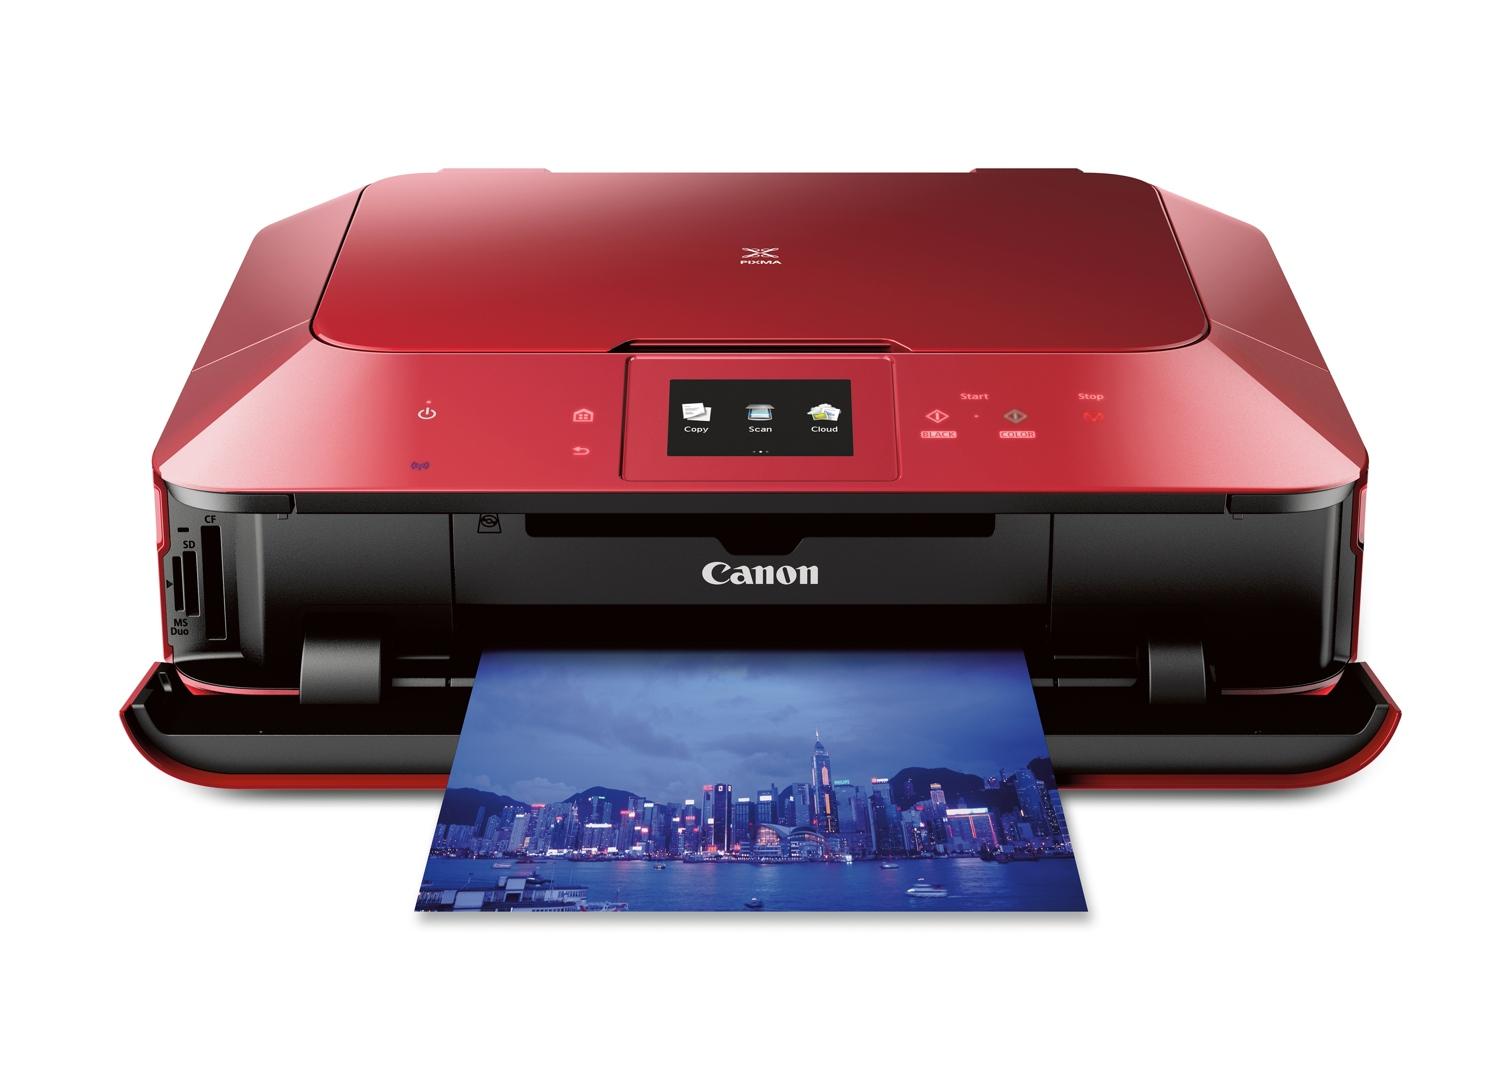 båd Penge gummi meget fint Canon unveils Pixma MG7120, MG5520 printers | What to know | Digital Trends